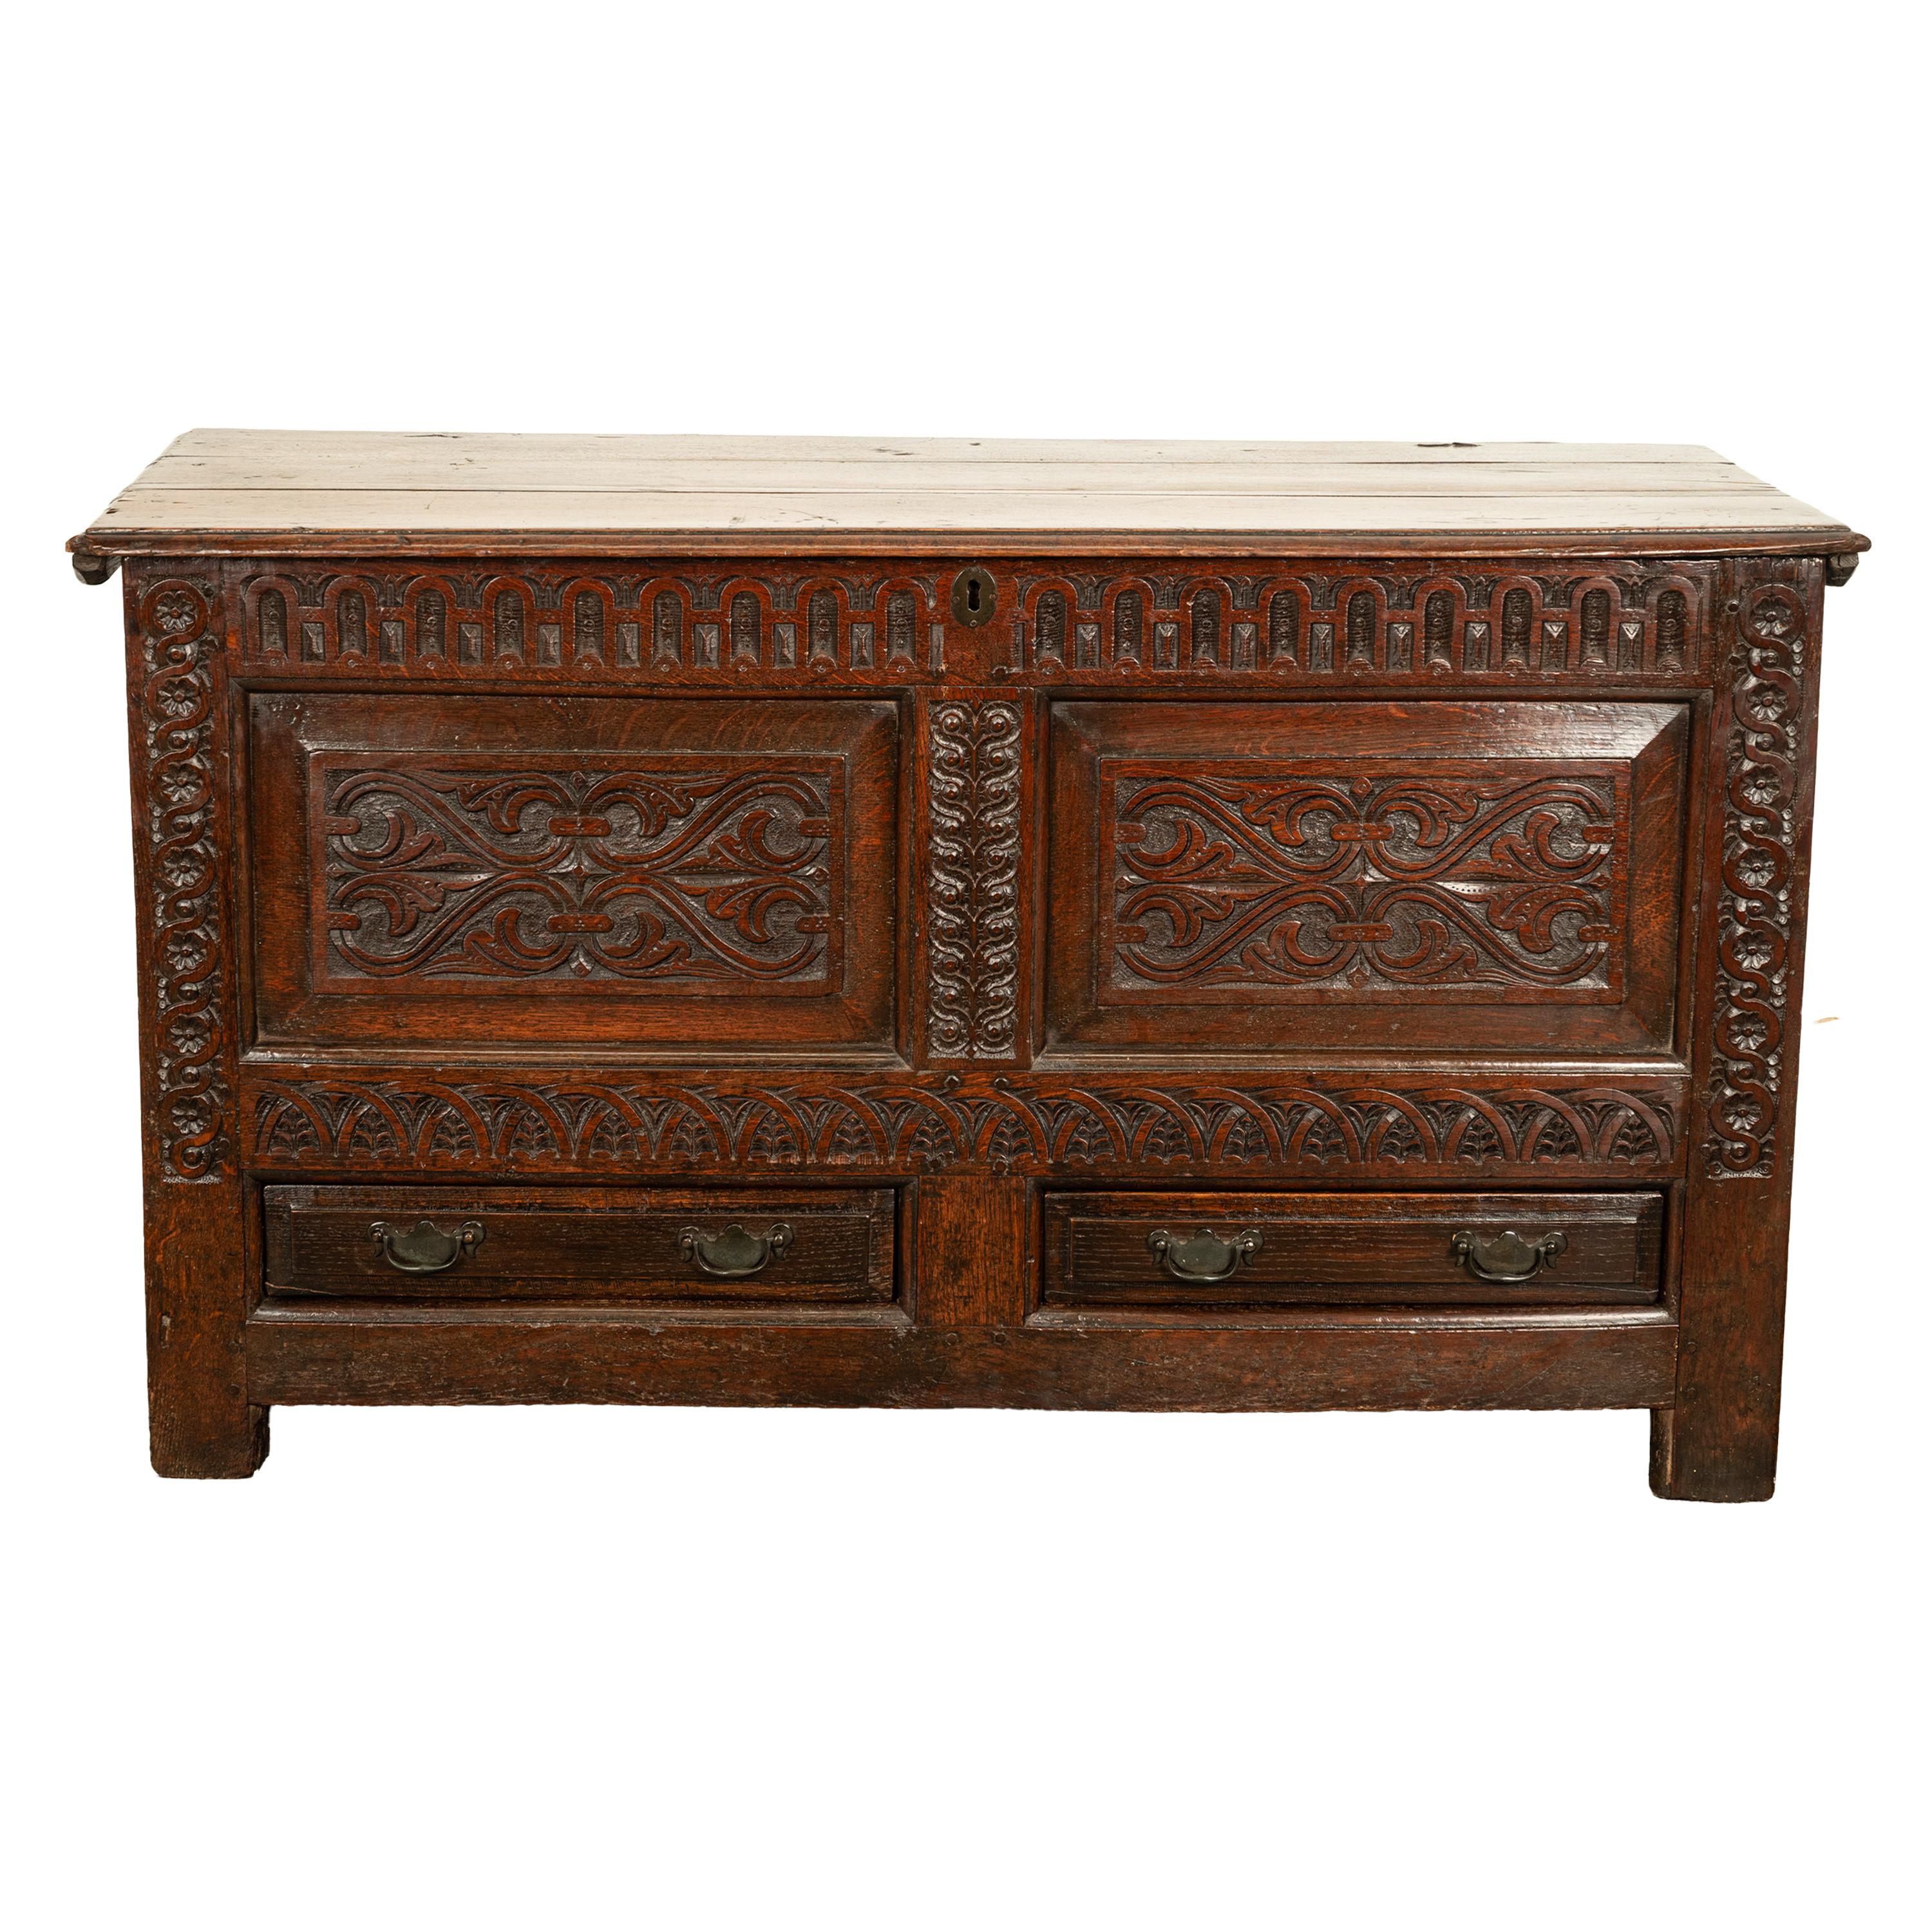 A wonderful Charles II carved oak coffer /mule chest, circa 1680.
The chest of fabulous colour & good original condition, the chest having a hinged lid with the original iron 'snipe' hinges. The carved front decorated with original period carving